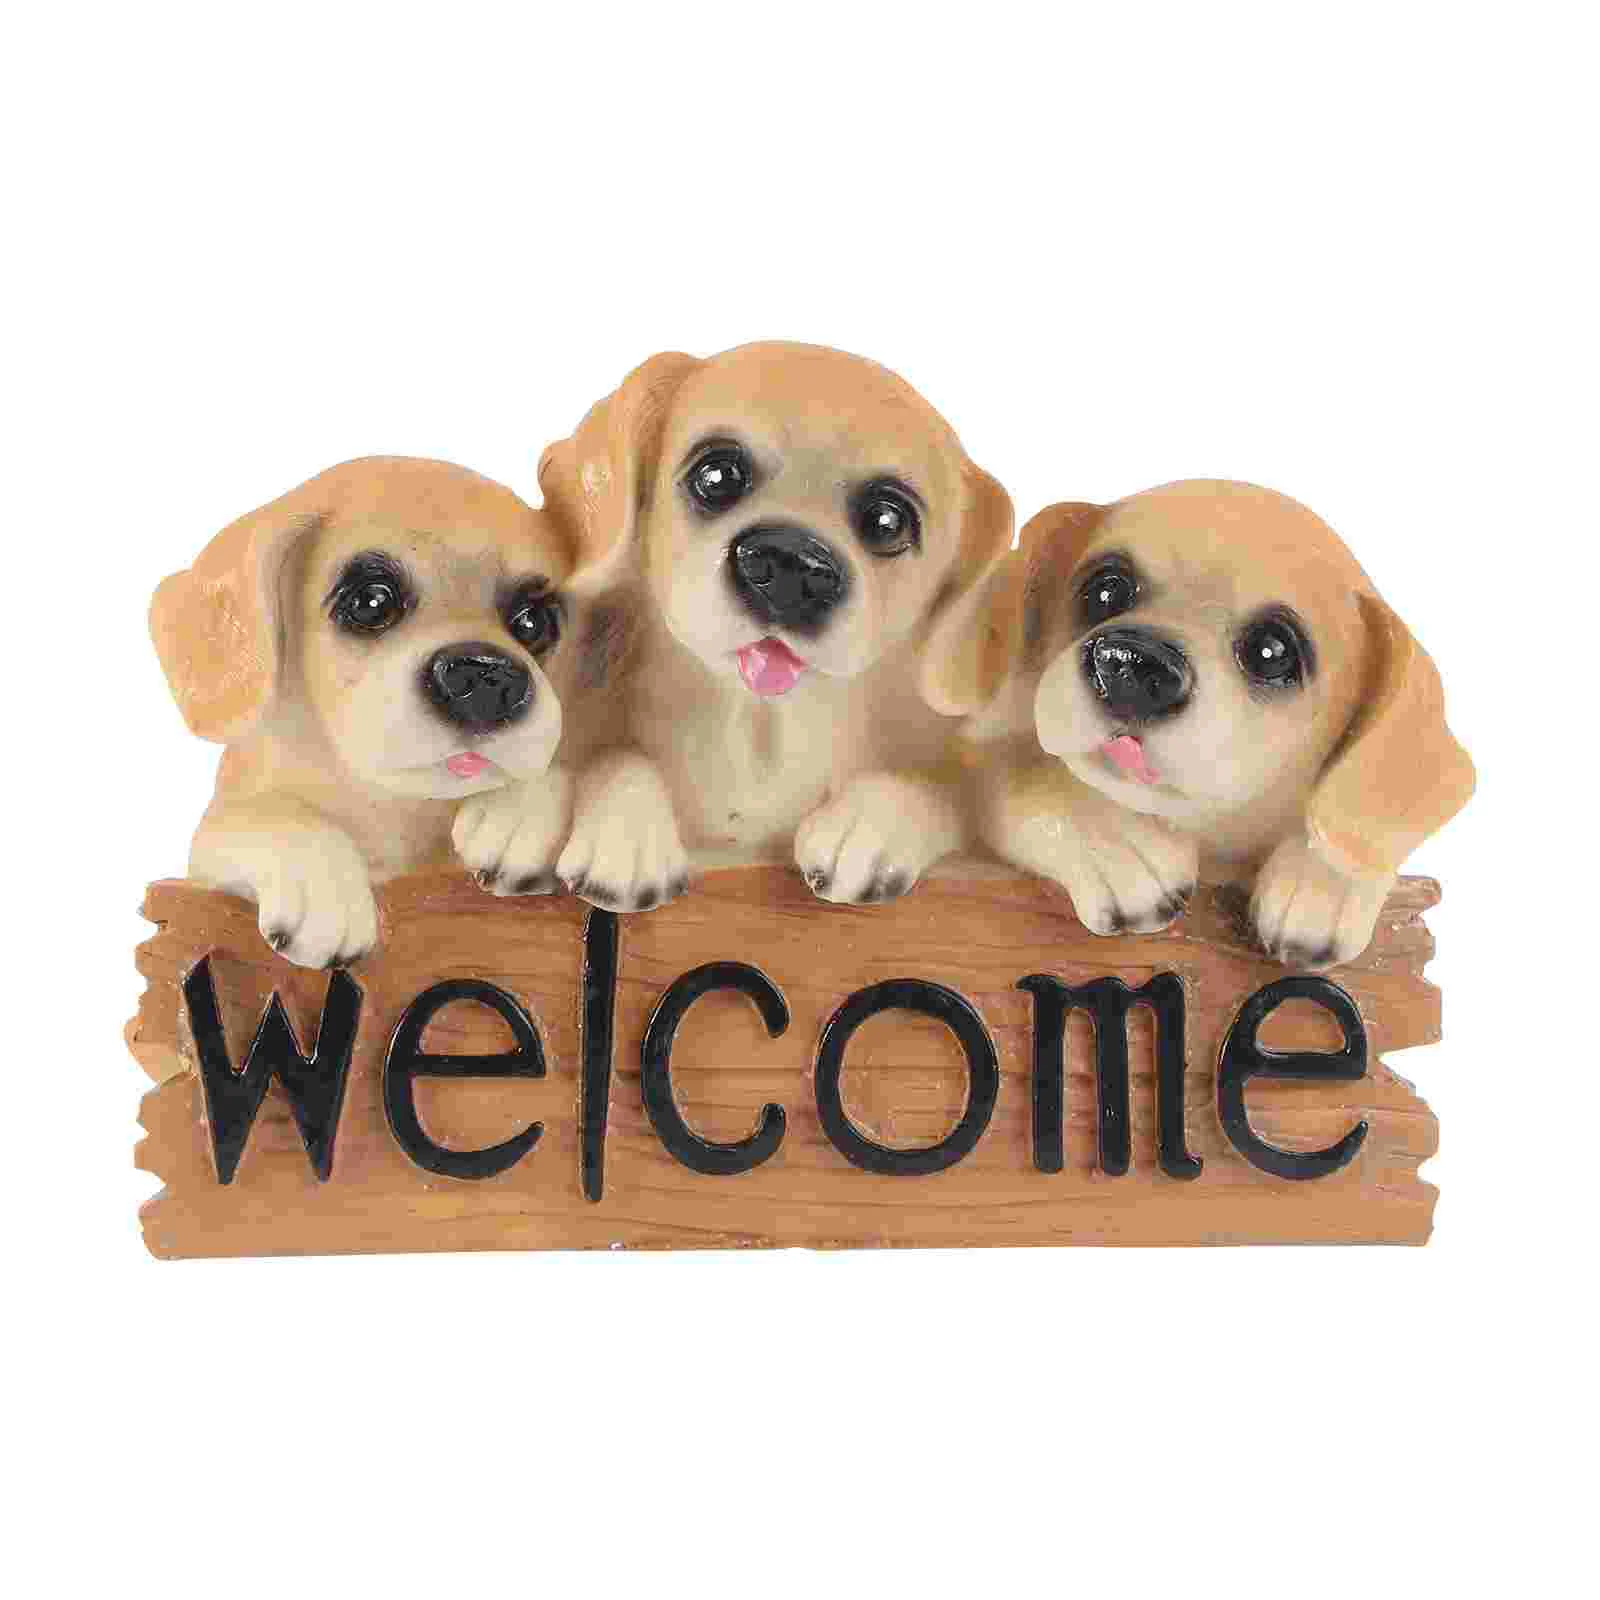 

Dog Puppy Welcome Figurines Decor Garden Resin Sign Statues Statue Pattern Realisticanimal French Parade Figurineornament